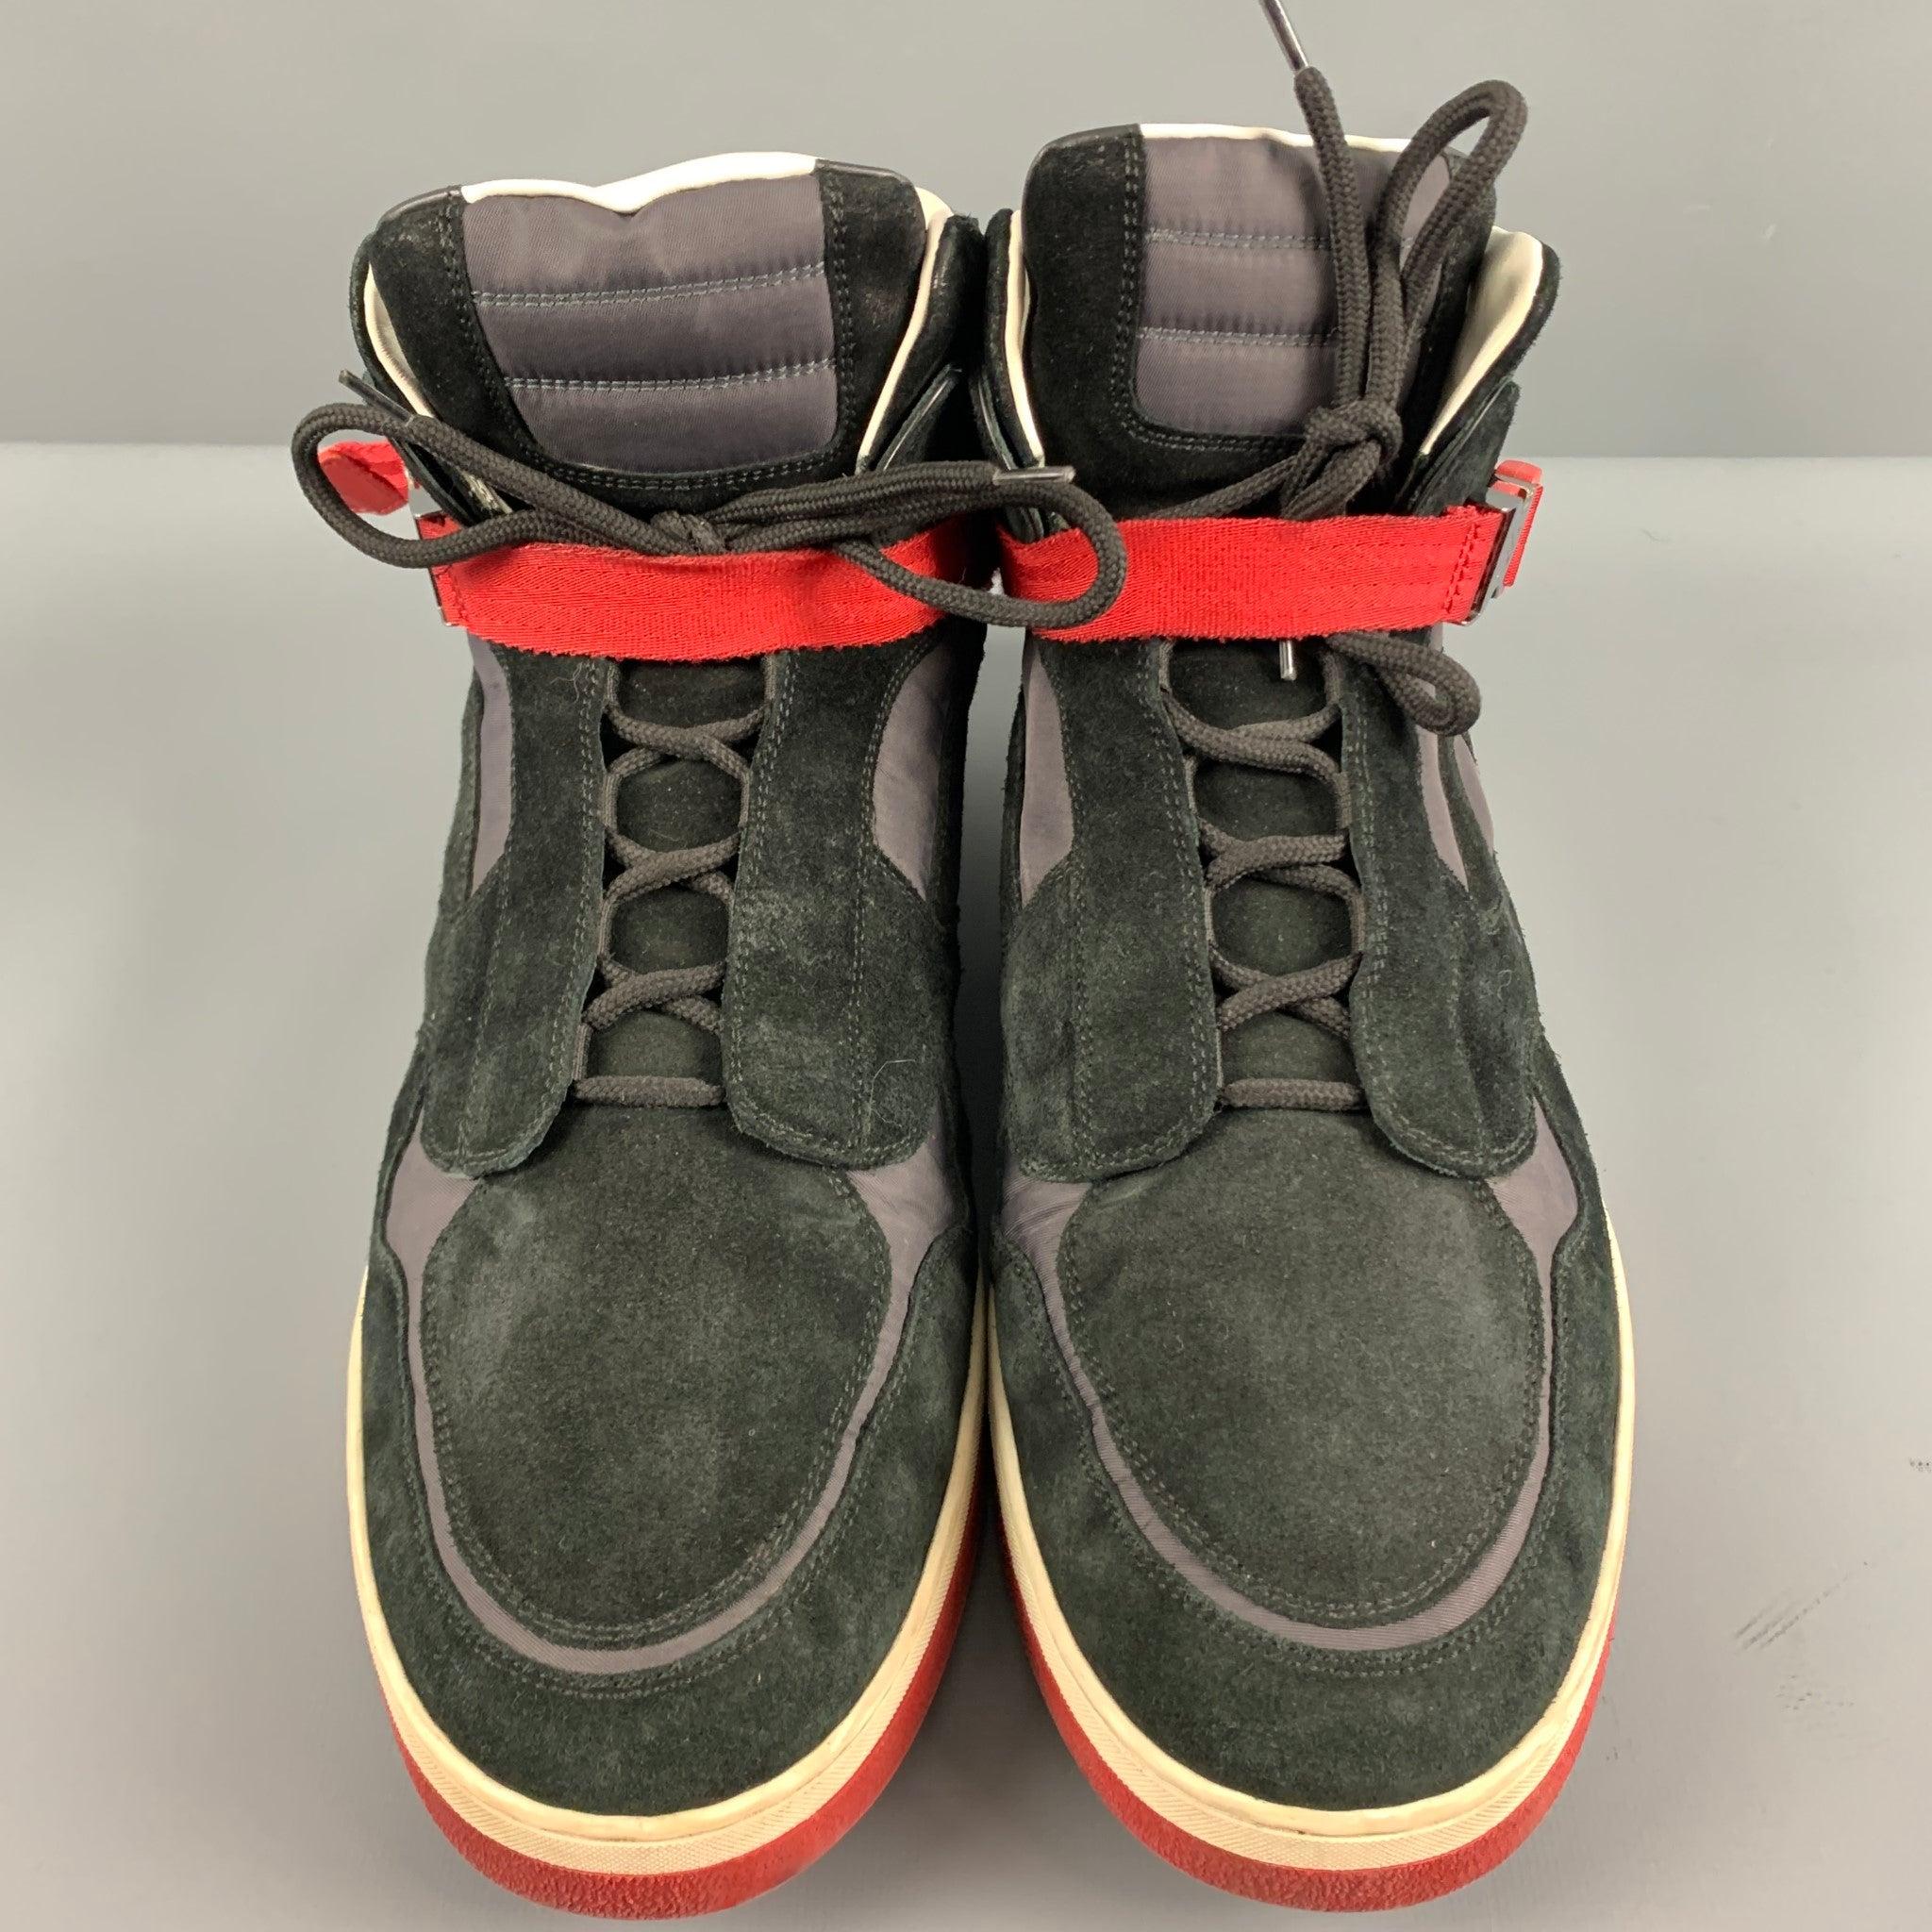 Men's LOUIS VUITTON Size 13 Black Red  Nylon Suede High Top Sneakers For Sale